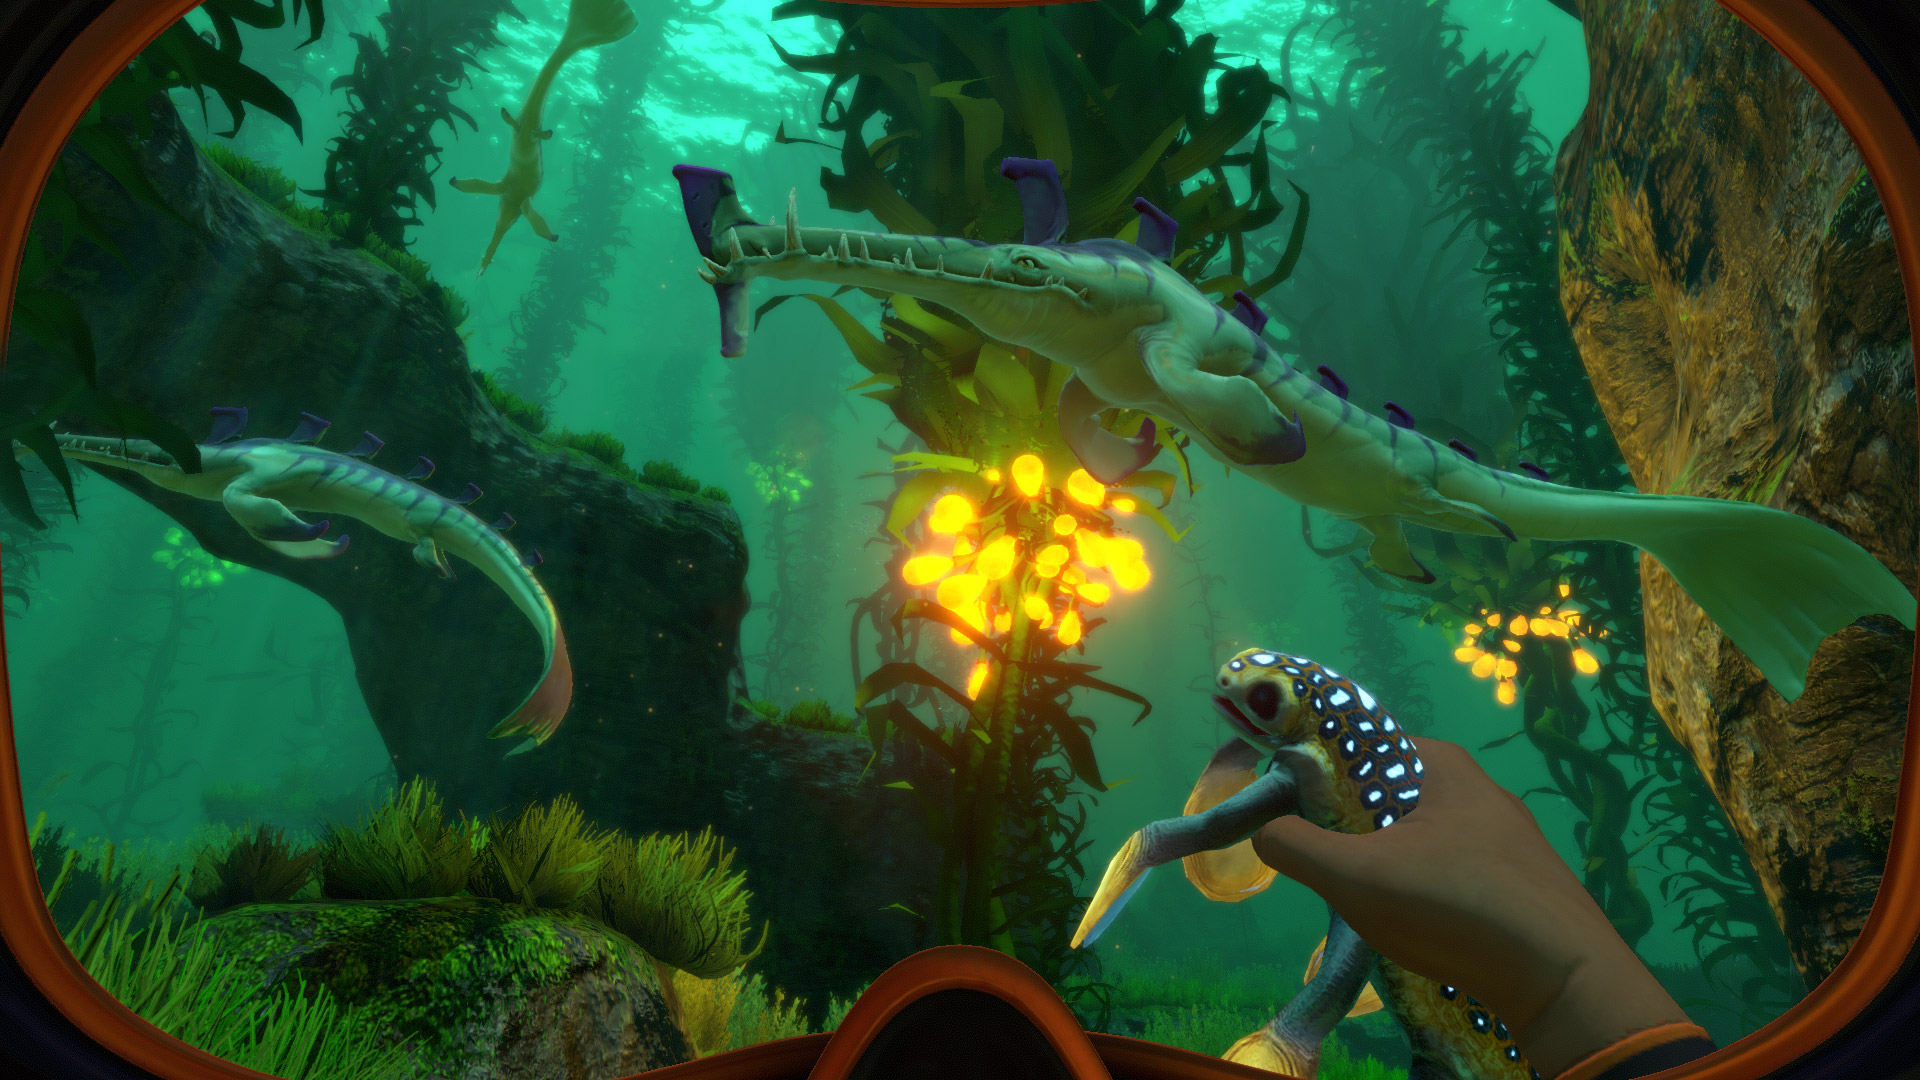 subnautica for mac review